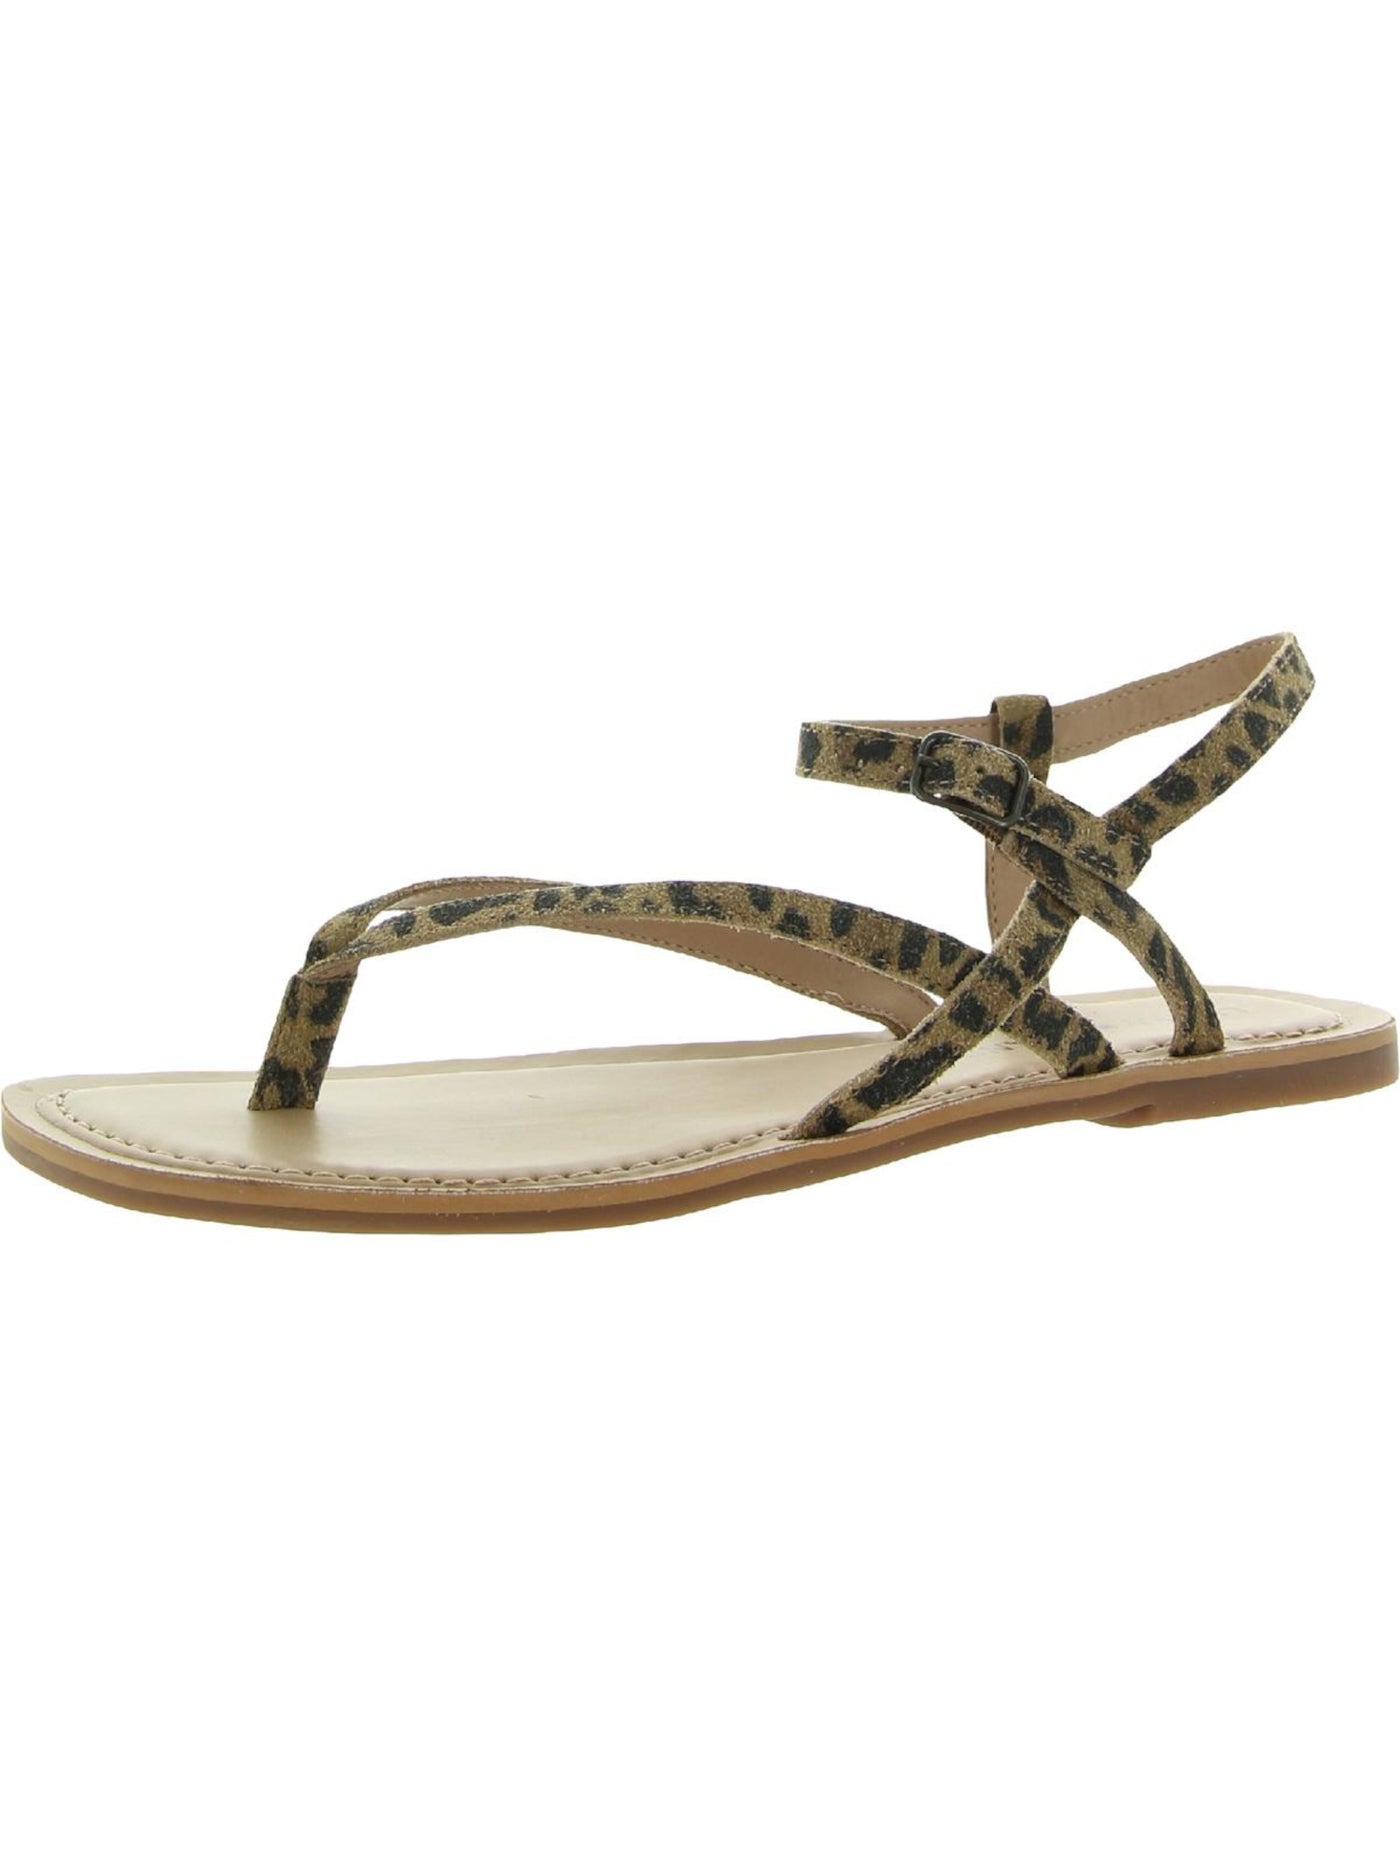 LUCKY BRAND Womens Beige Animal Print Leopard Ankle Strap Comfort Bylee Square Toe Buckle Leather Thong Sandals Shoes 11 M